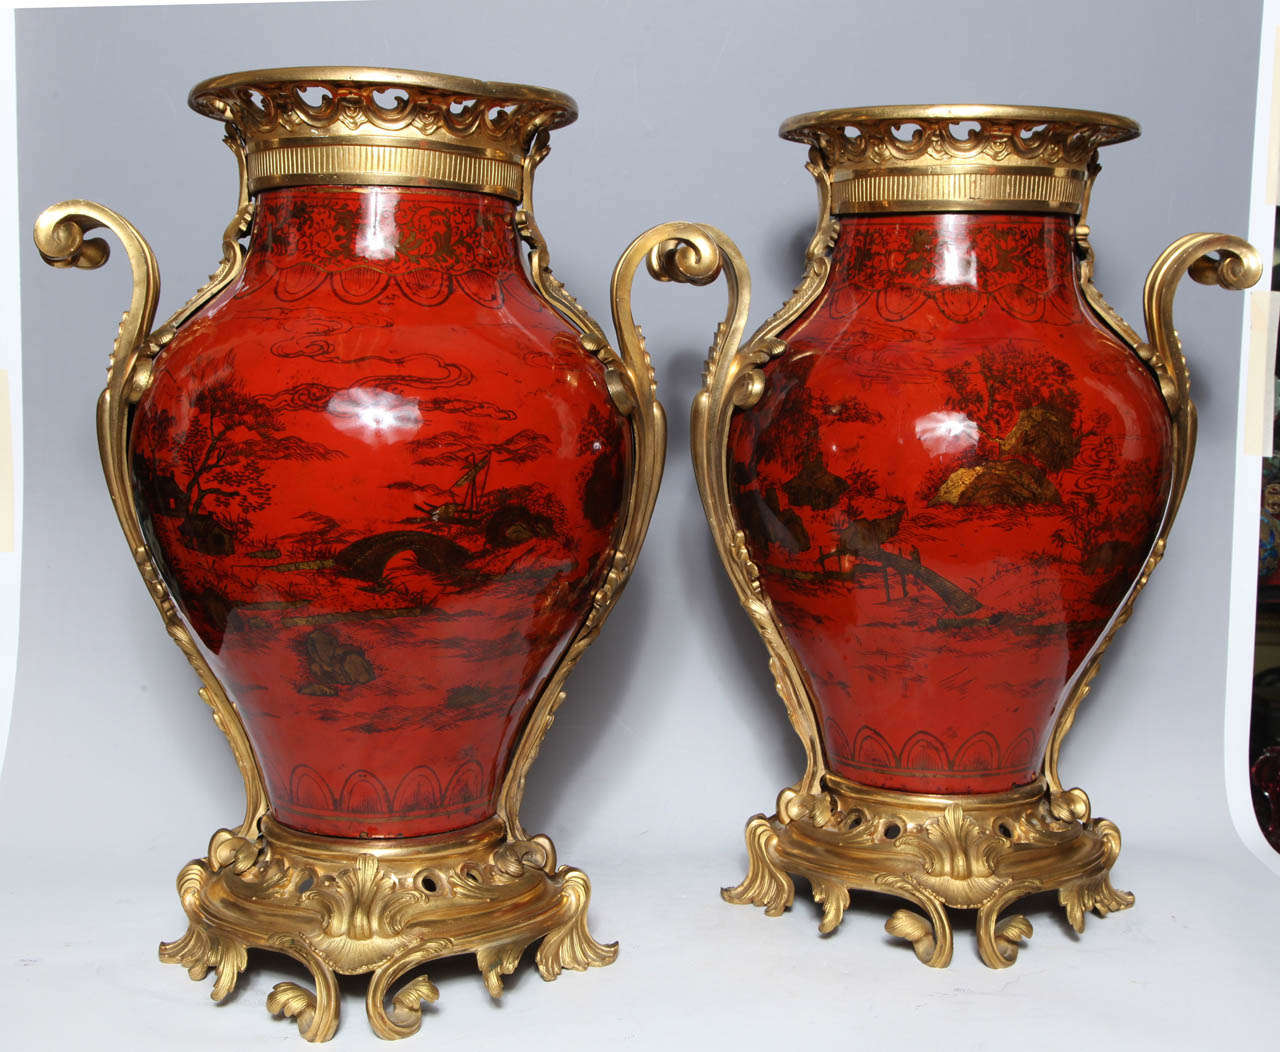 A large pair of antique French transitional period red lacquer, chinoiserie decorated ormolu-mounted vases with gilt bronze Rococo mounts. The vibrant color of these highly polished vases is enhanced by the beautiful scenes of mountains and rivers